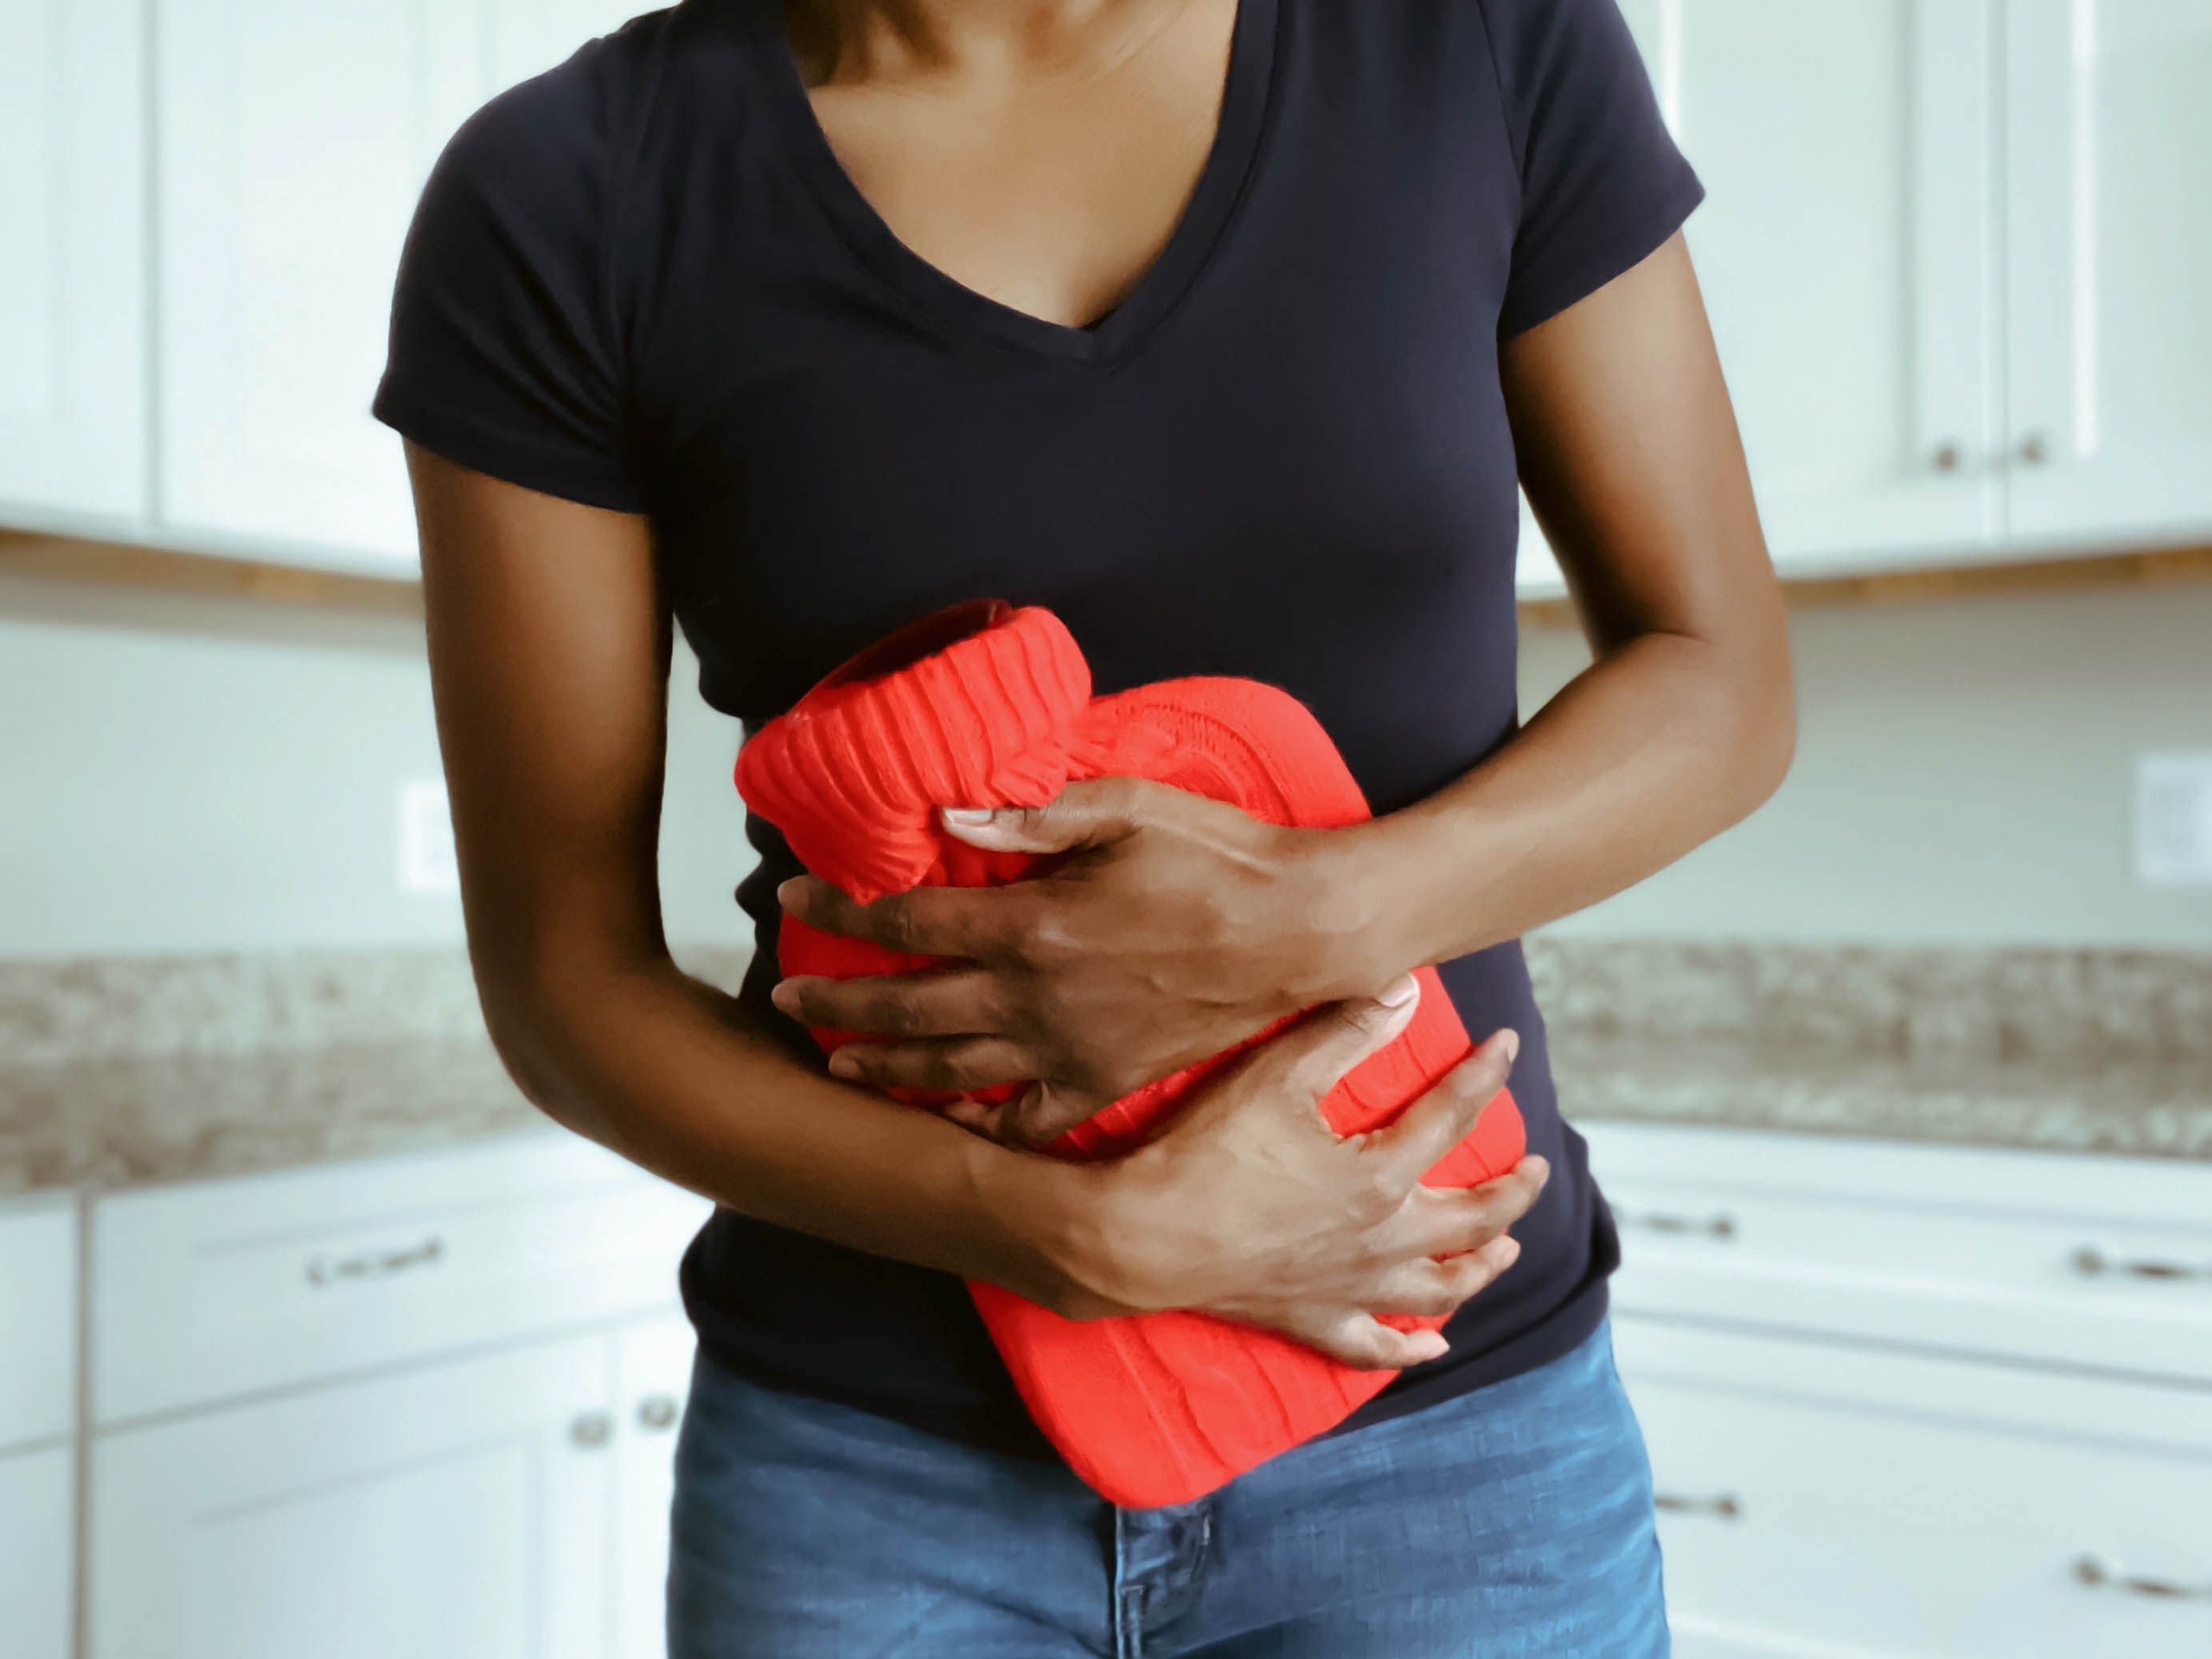 Period cramps disrupting your routine? Here are some ways to deal with the  pain